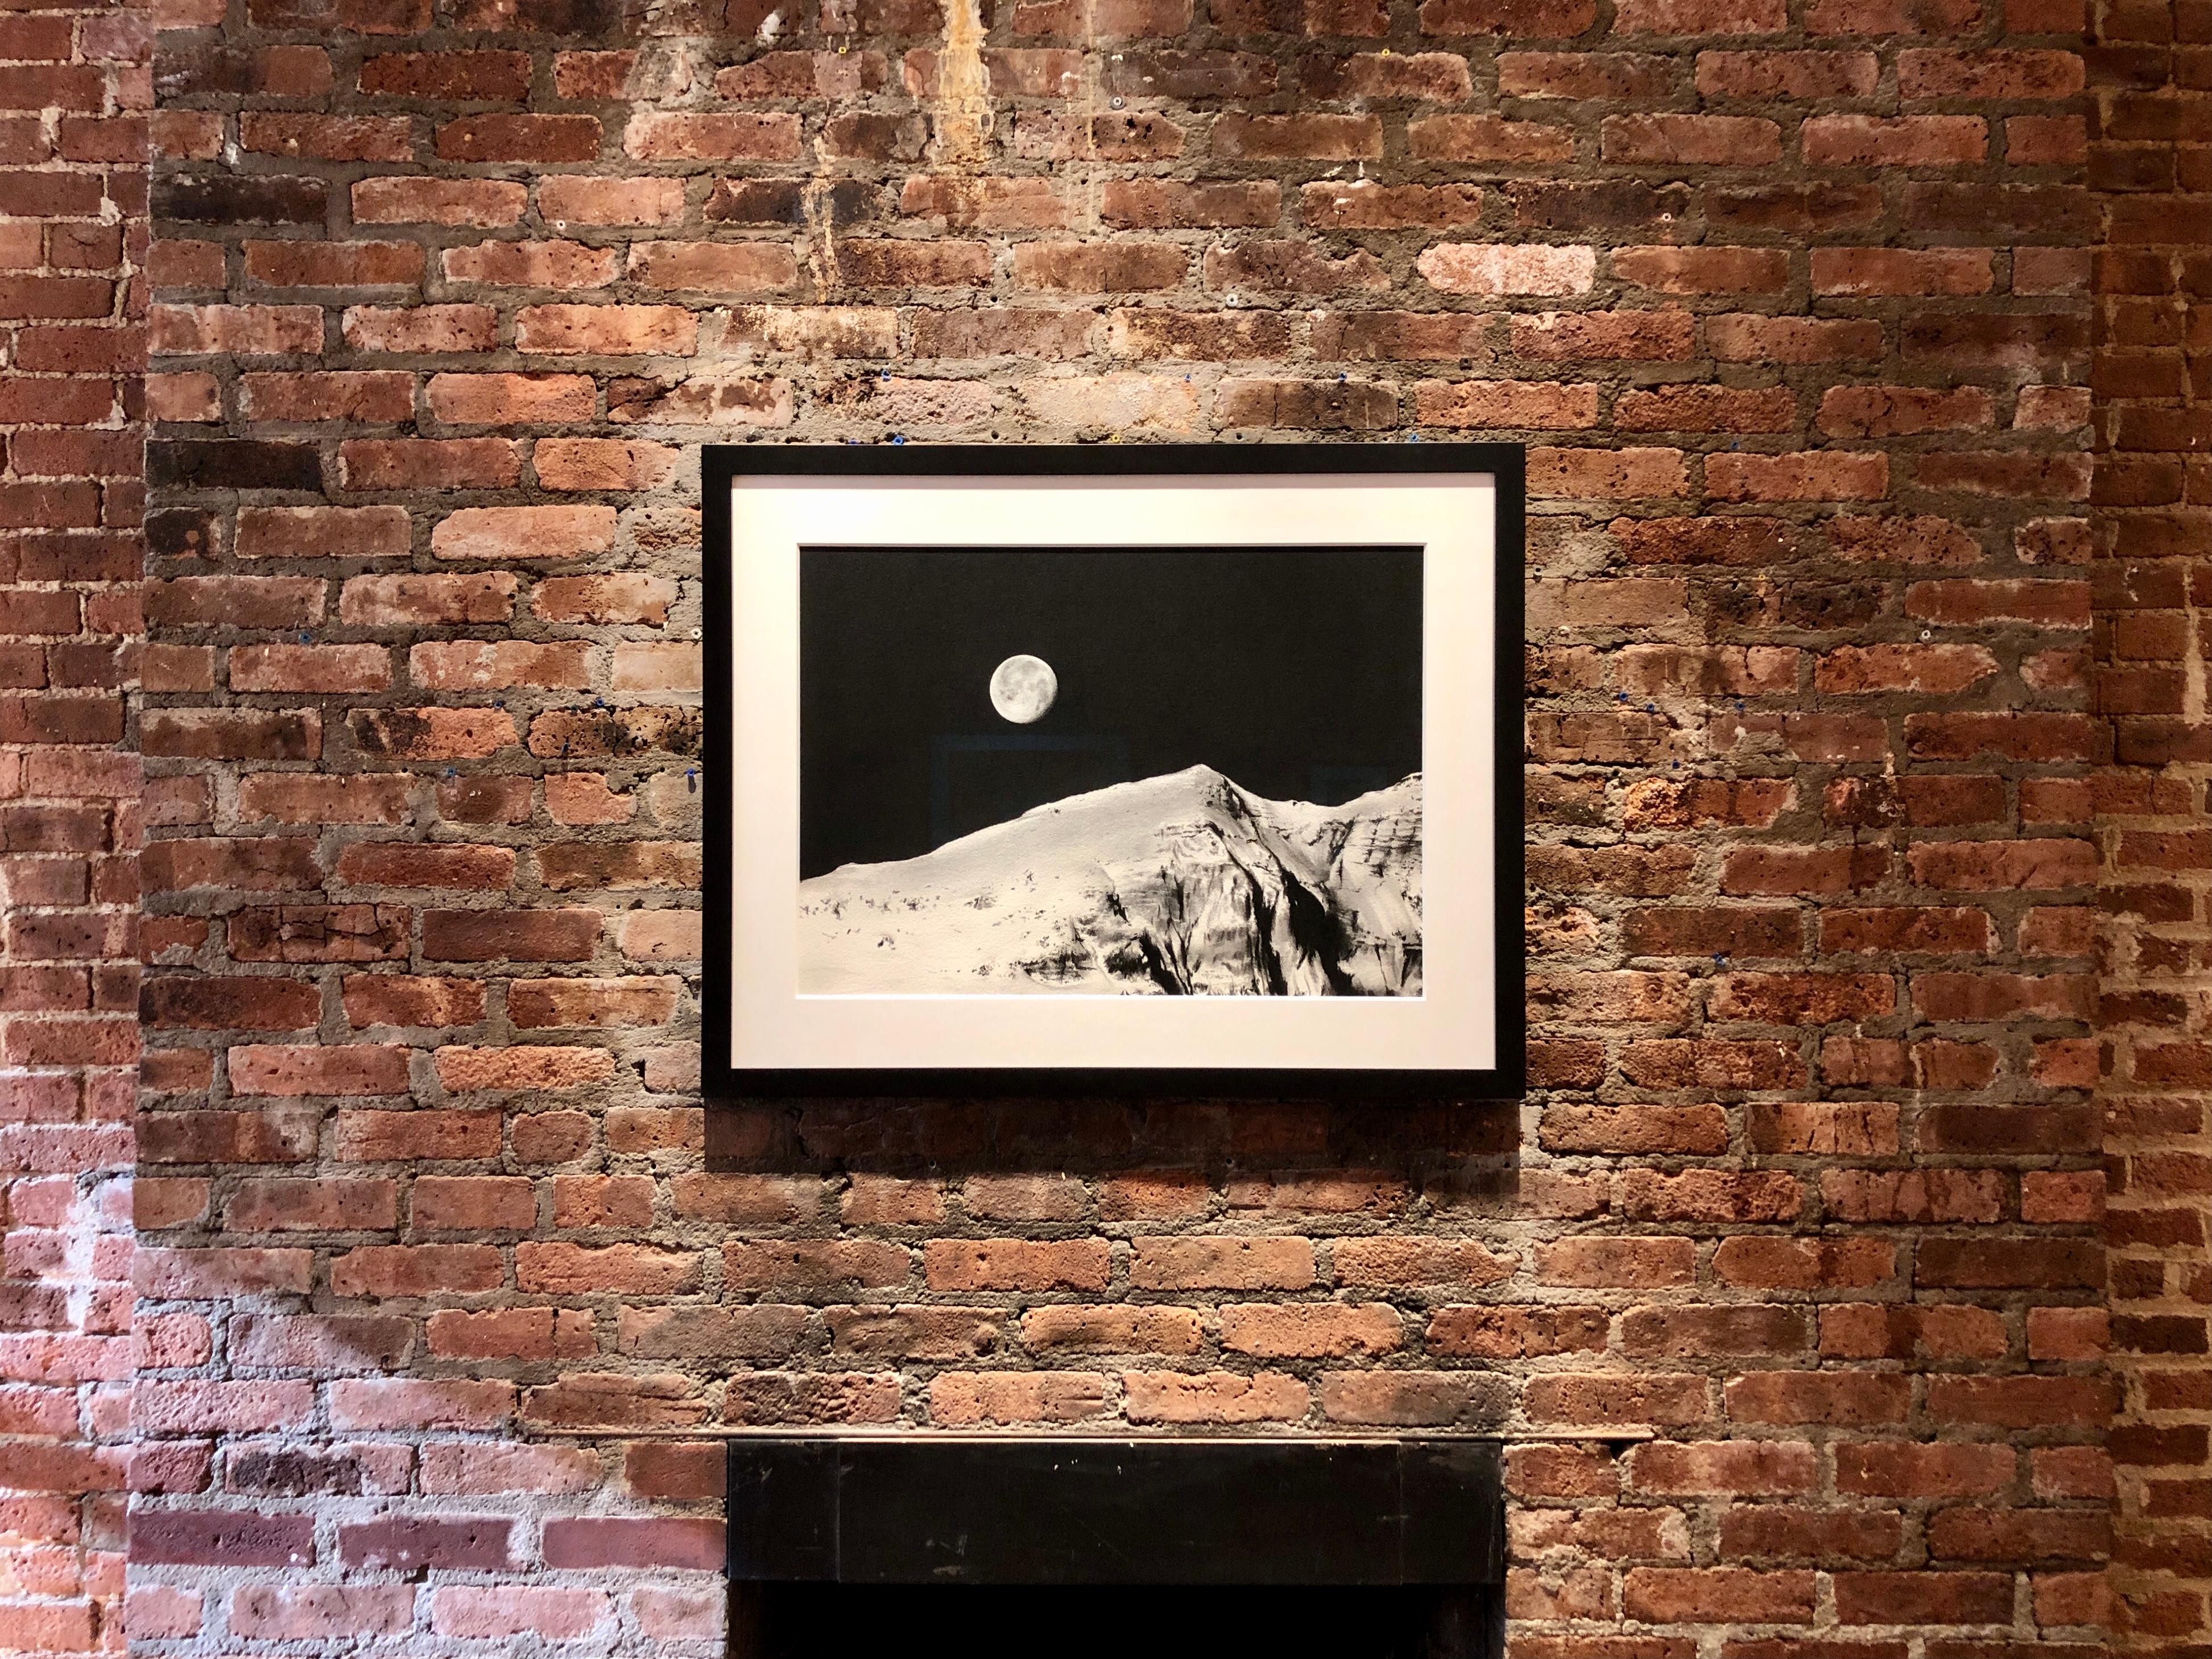 Supermoon in Banff, black and white charcoal drawing of moon over mountains - Art by Katherine Curci